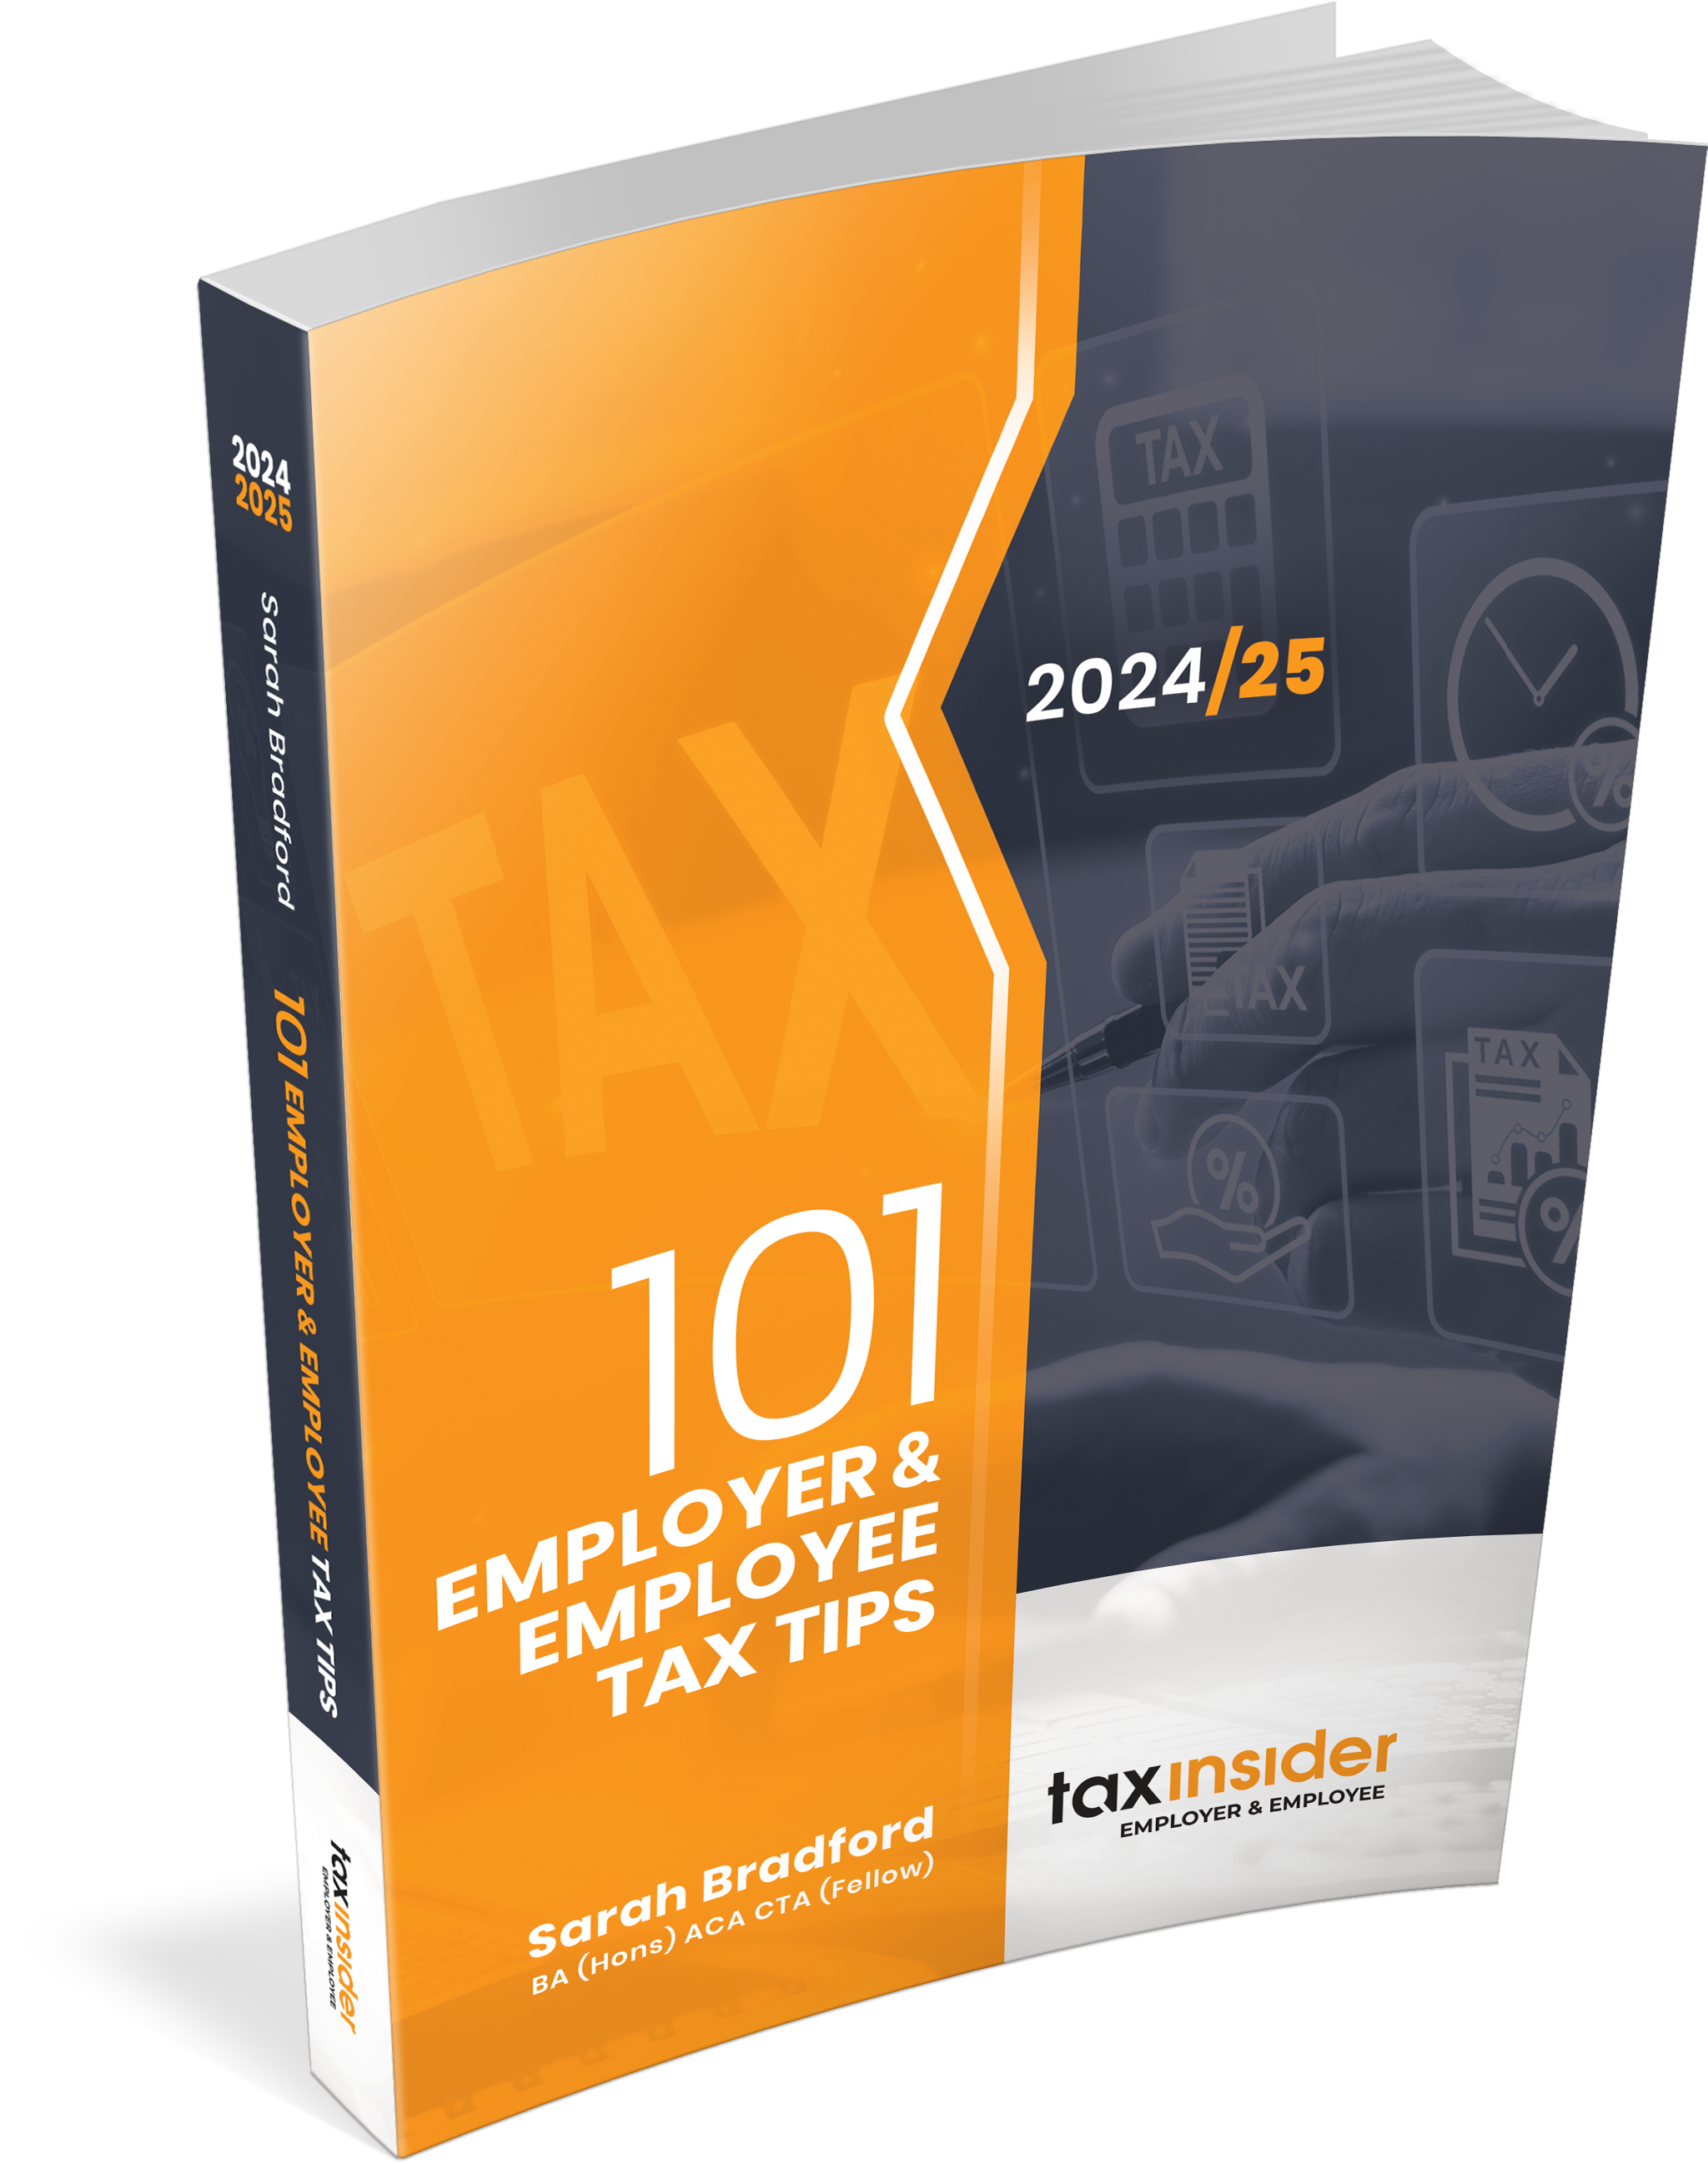 101 Employer and Employee Tax Tips, Tax Insider businessman employer book cover